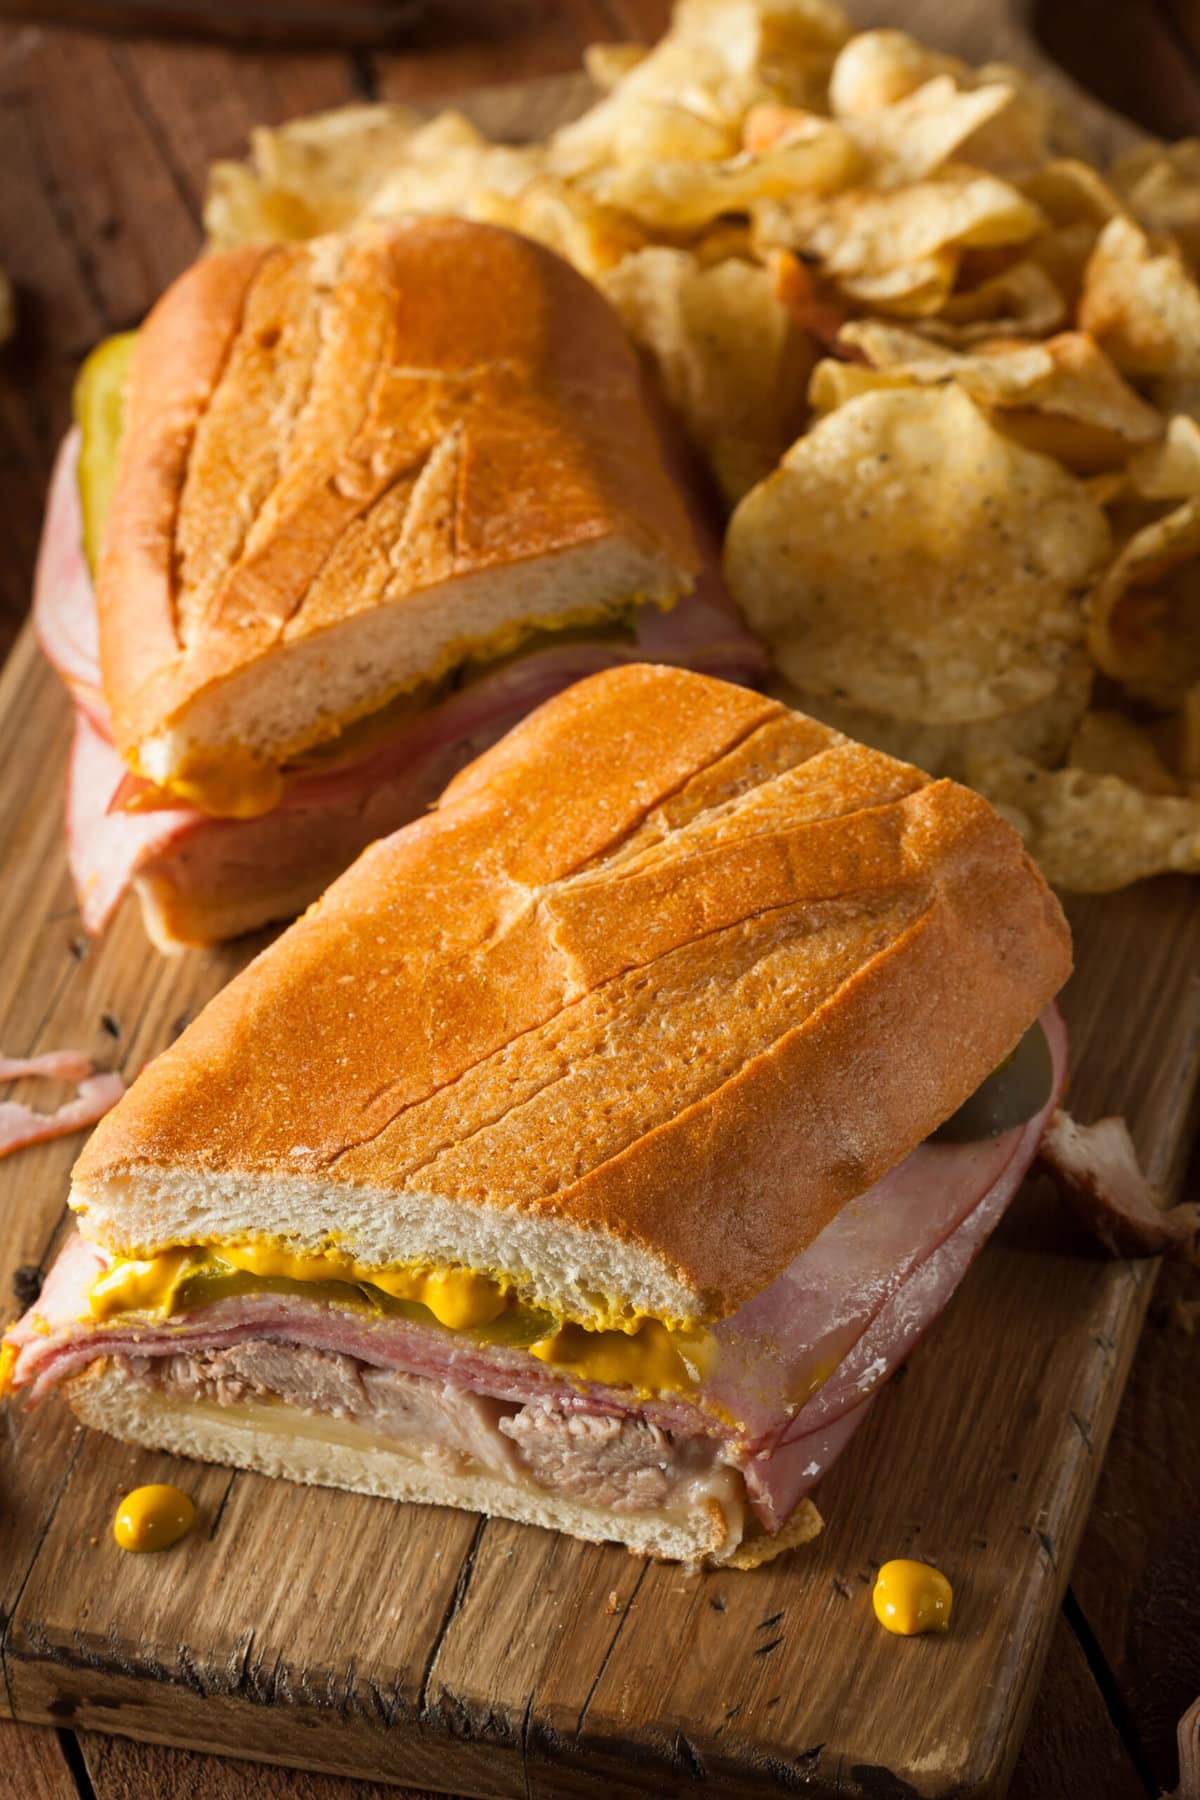 Sliced sandwich with Swiss cheese, ham, pulled pork, and pickles,